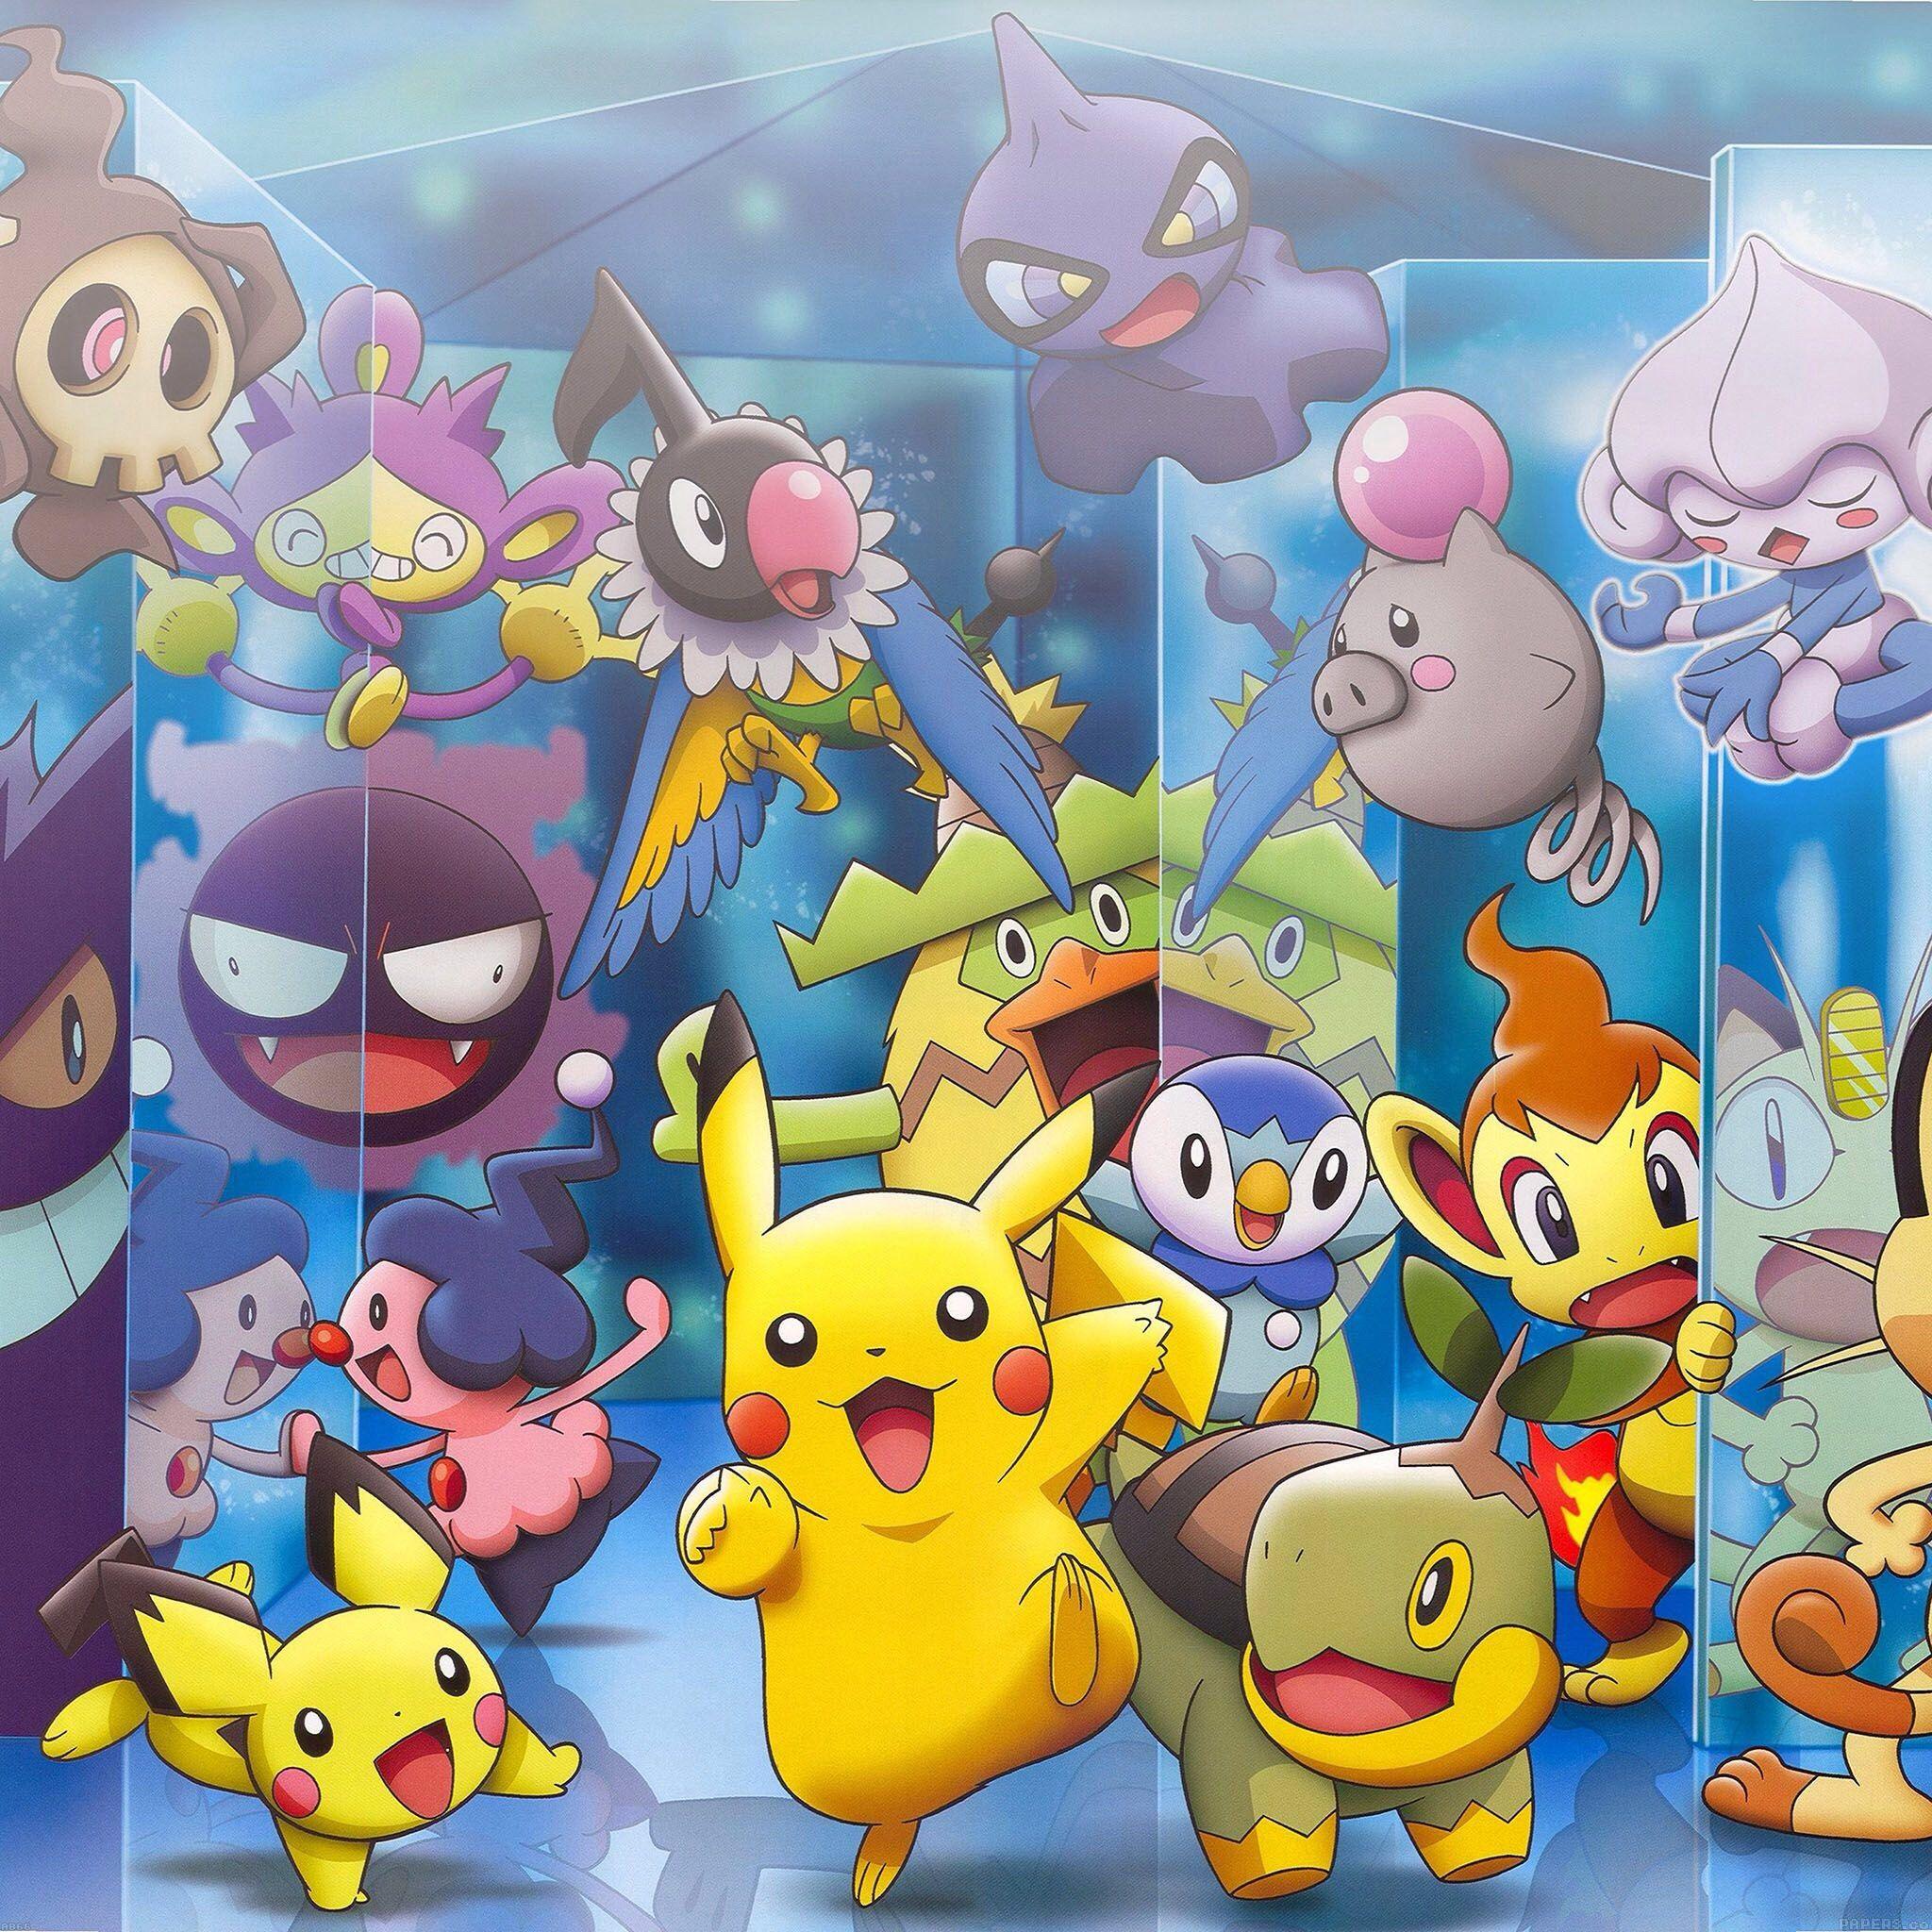 Pokémon image Pikachu and Friends HD wallpaper and background